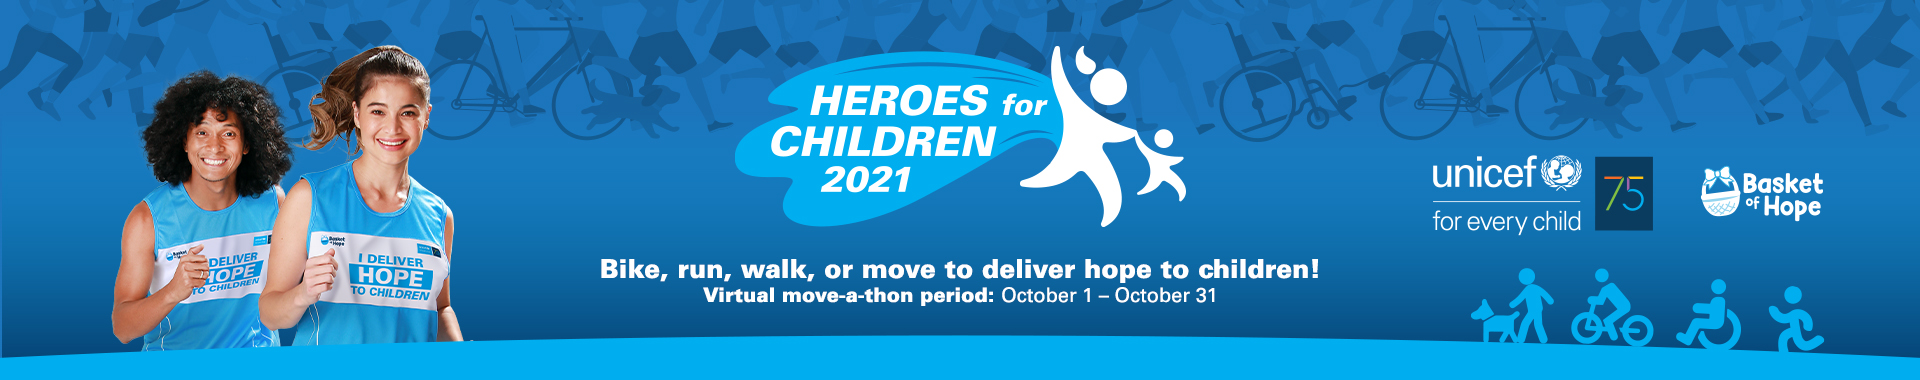 Sign up for the UNICEF Heroes for Children 2021